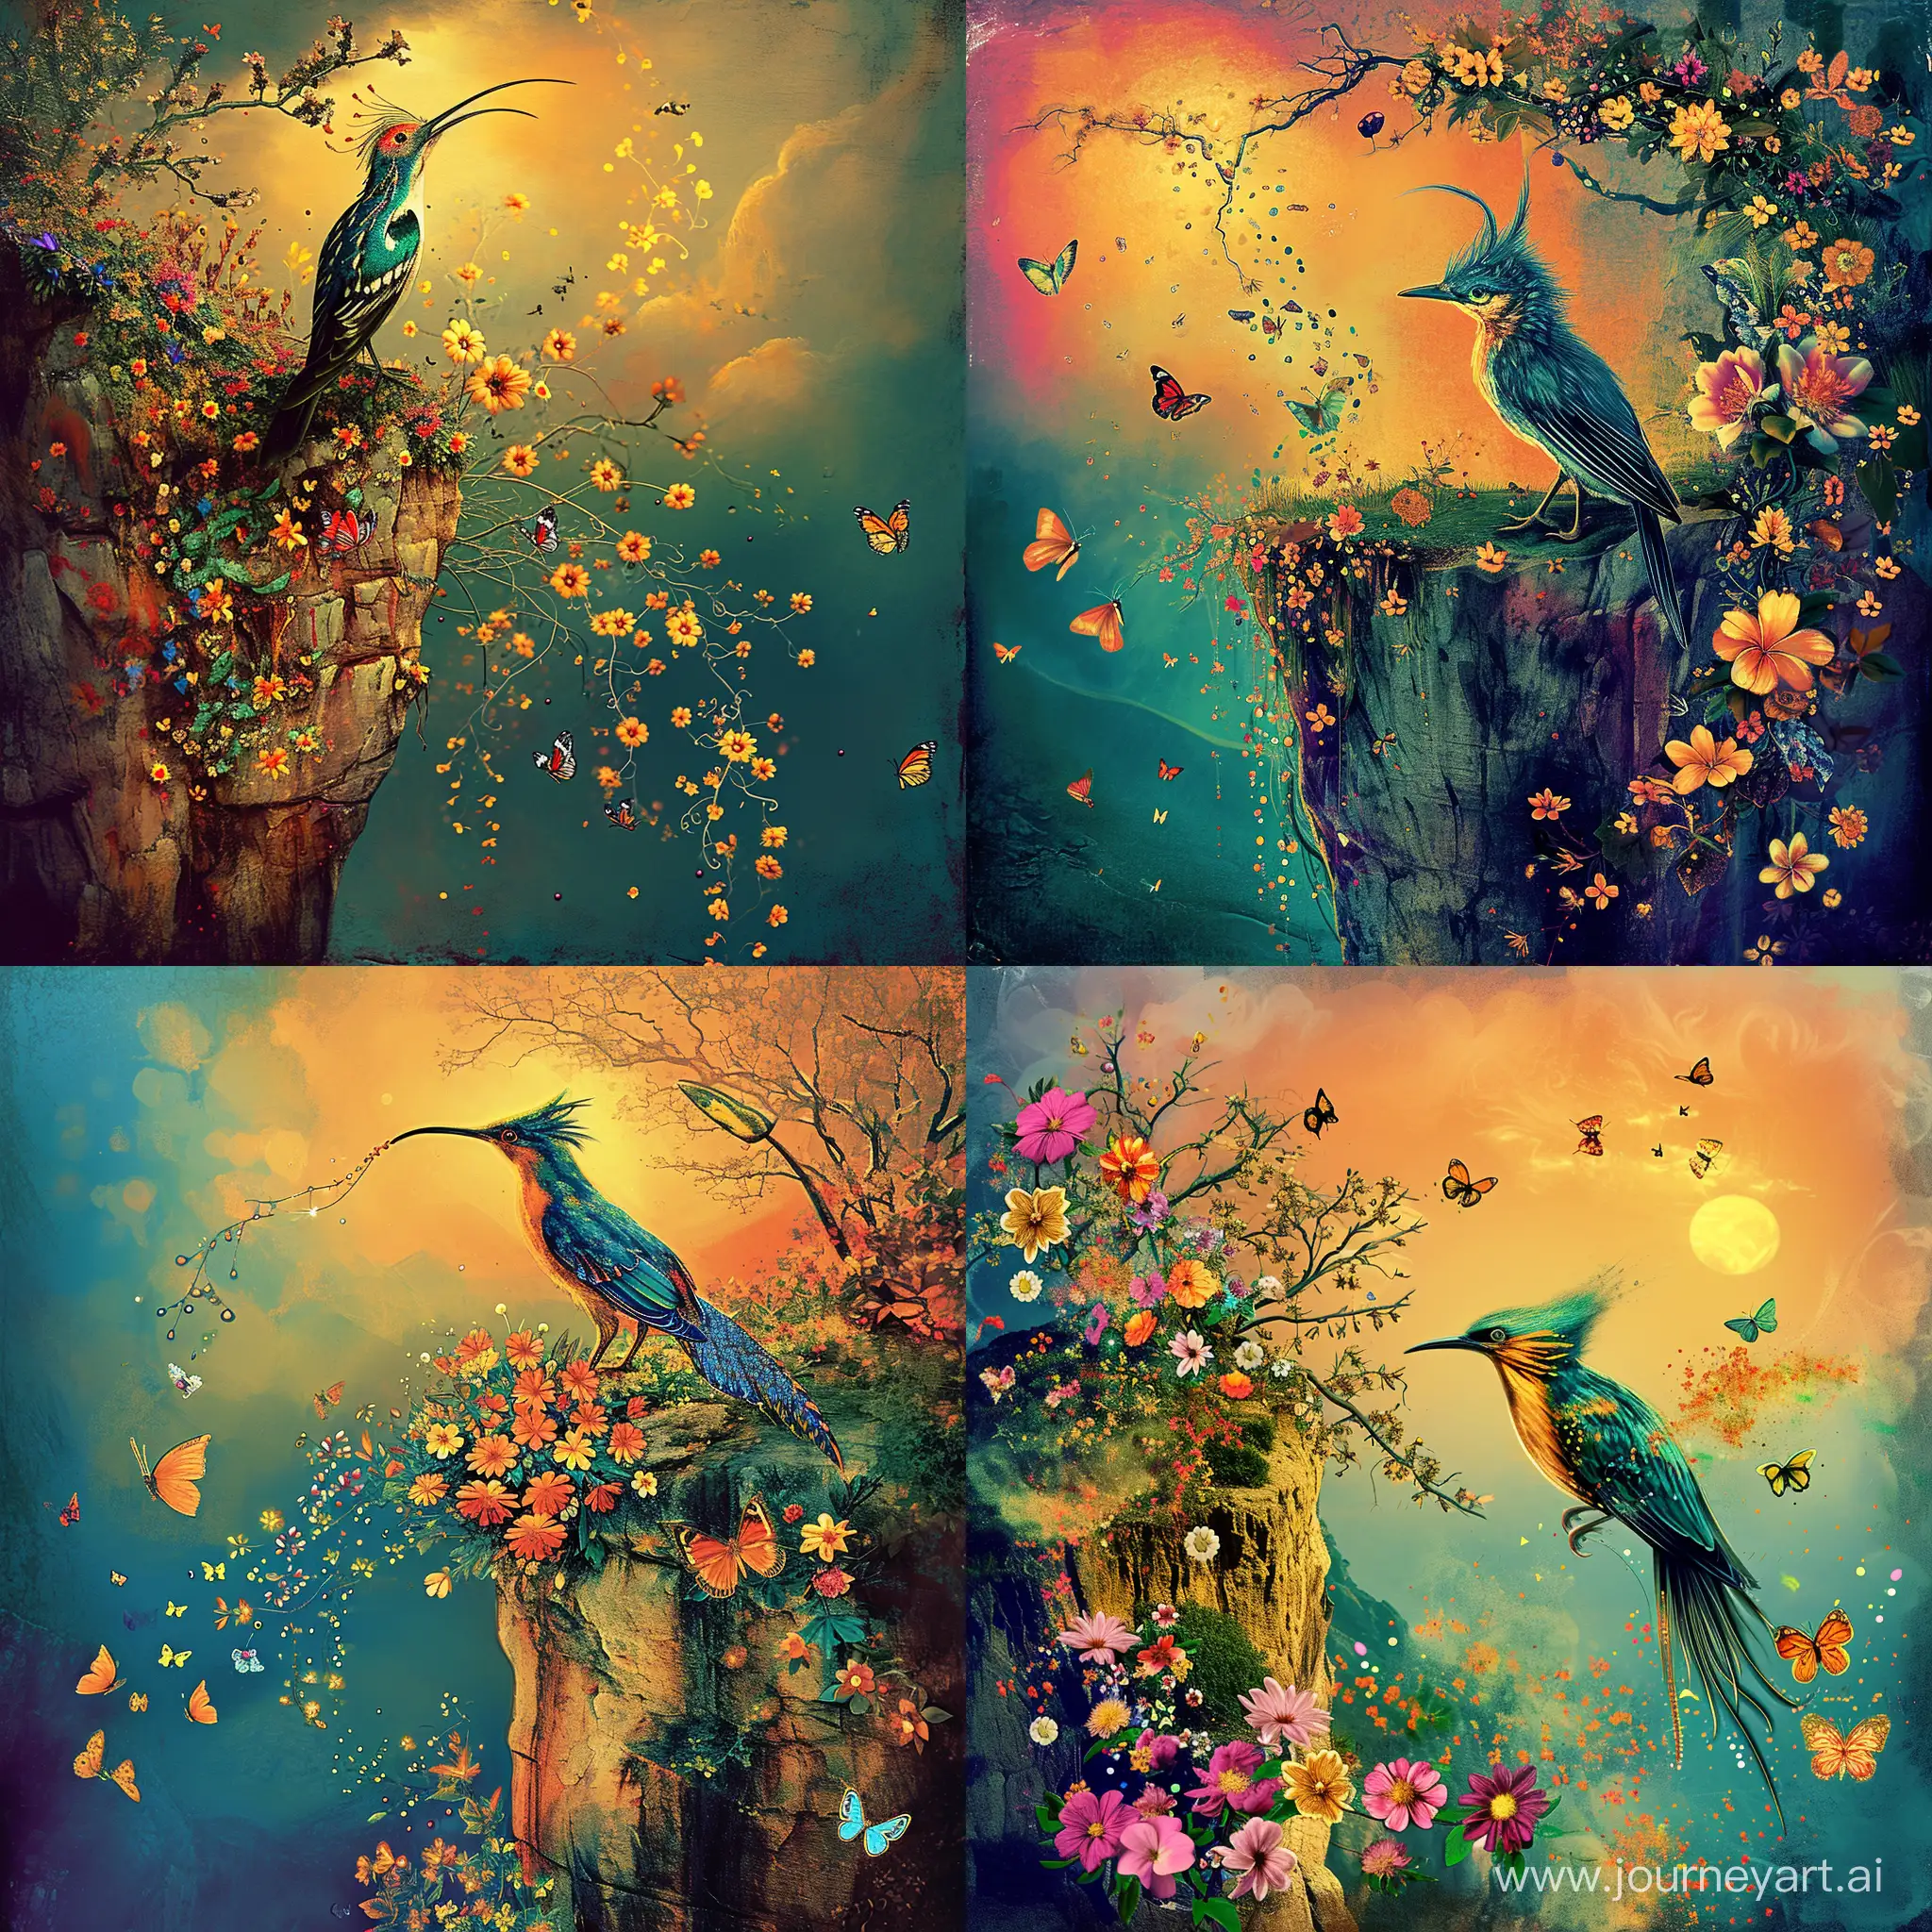 Colorful-Bird-Perched-on-Cliff-Surrounded-by-Flowers-and-Butterflies